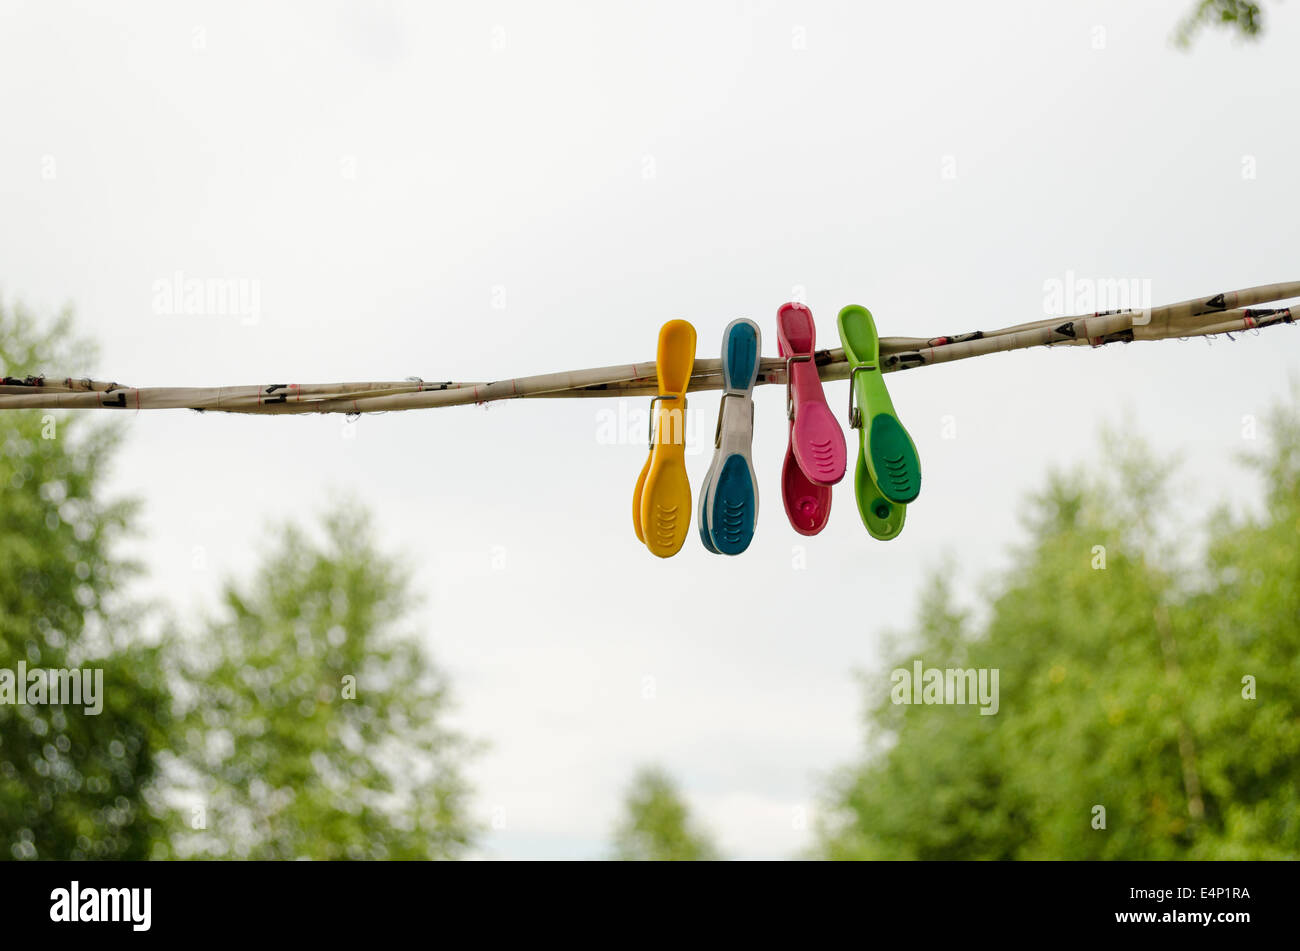 colorful shape clothes pins hanging on rope outdoor Stock Photo